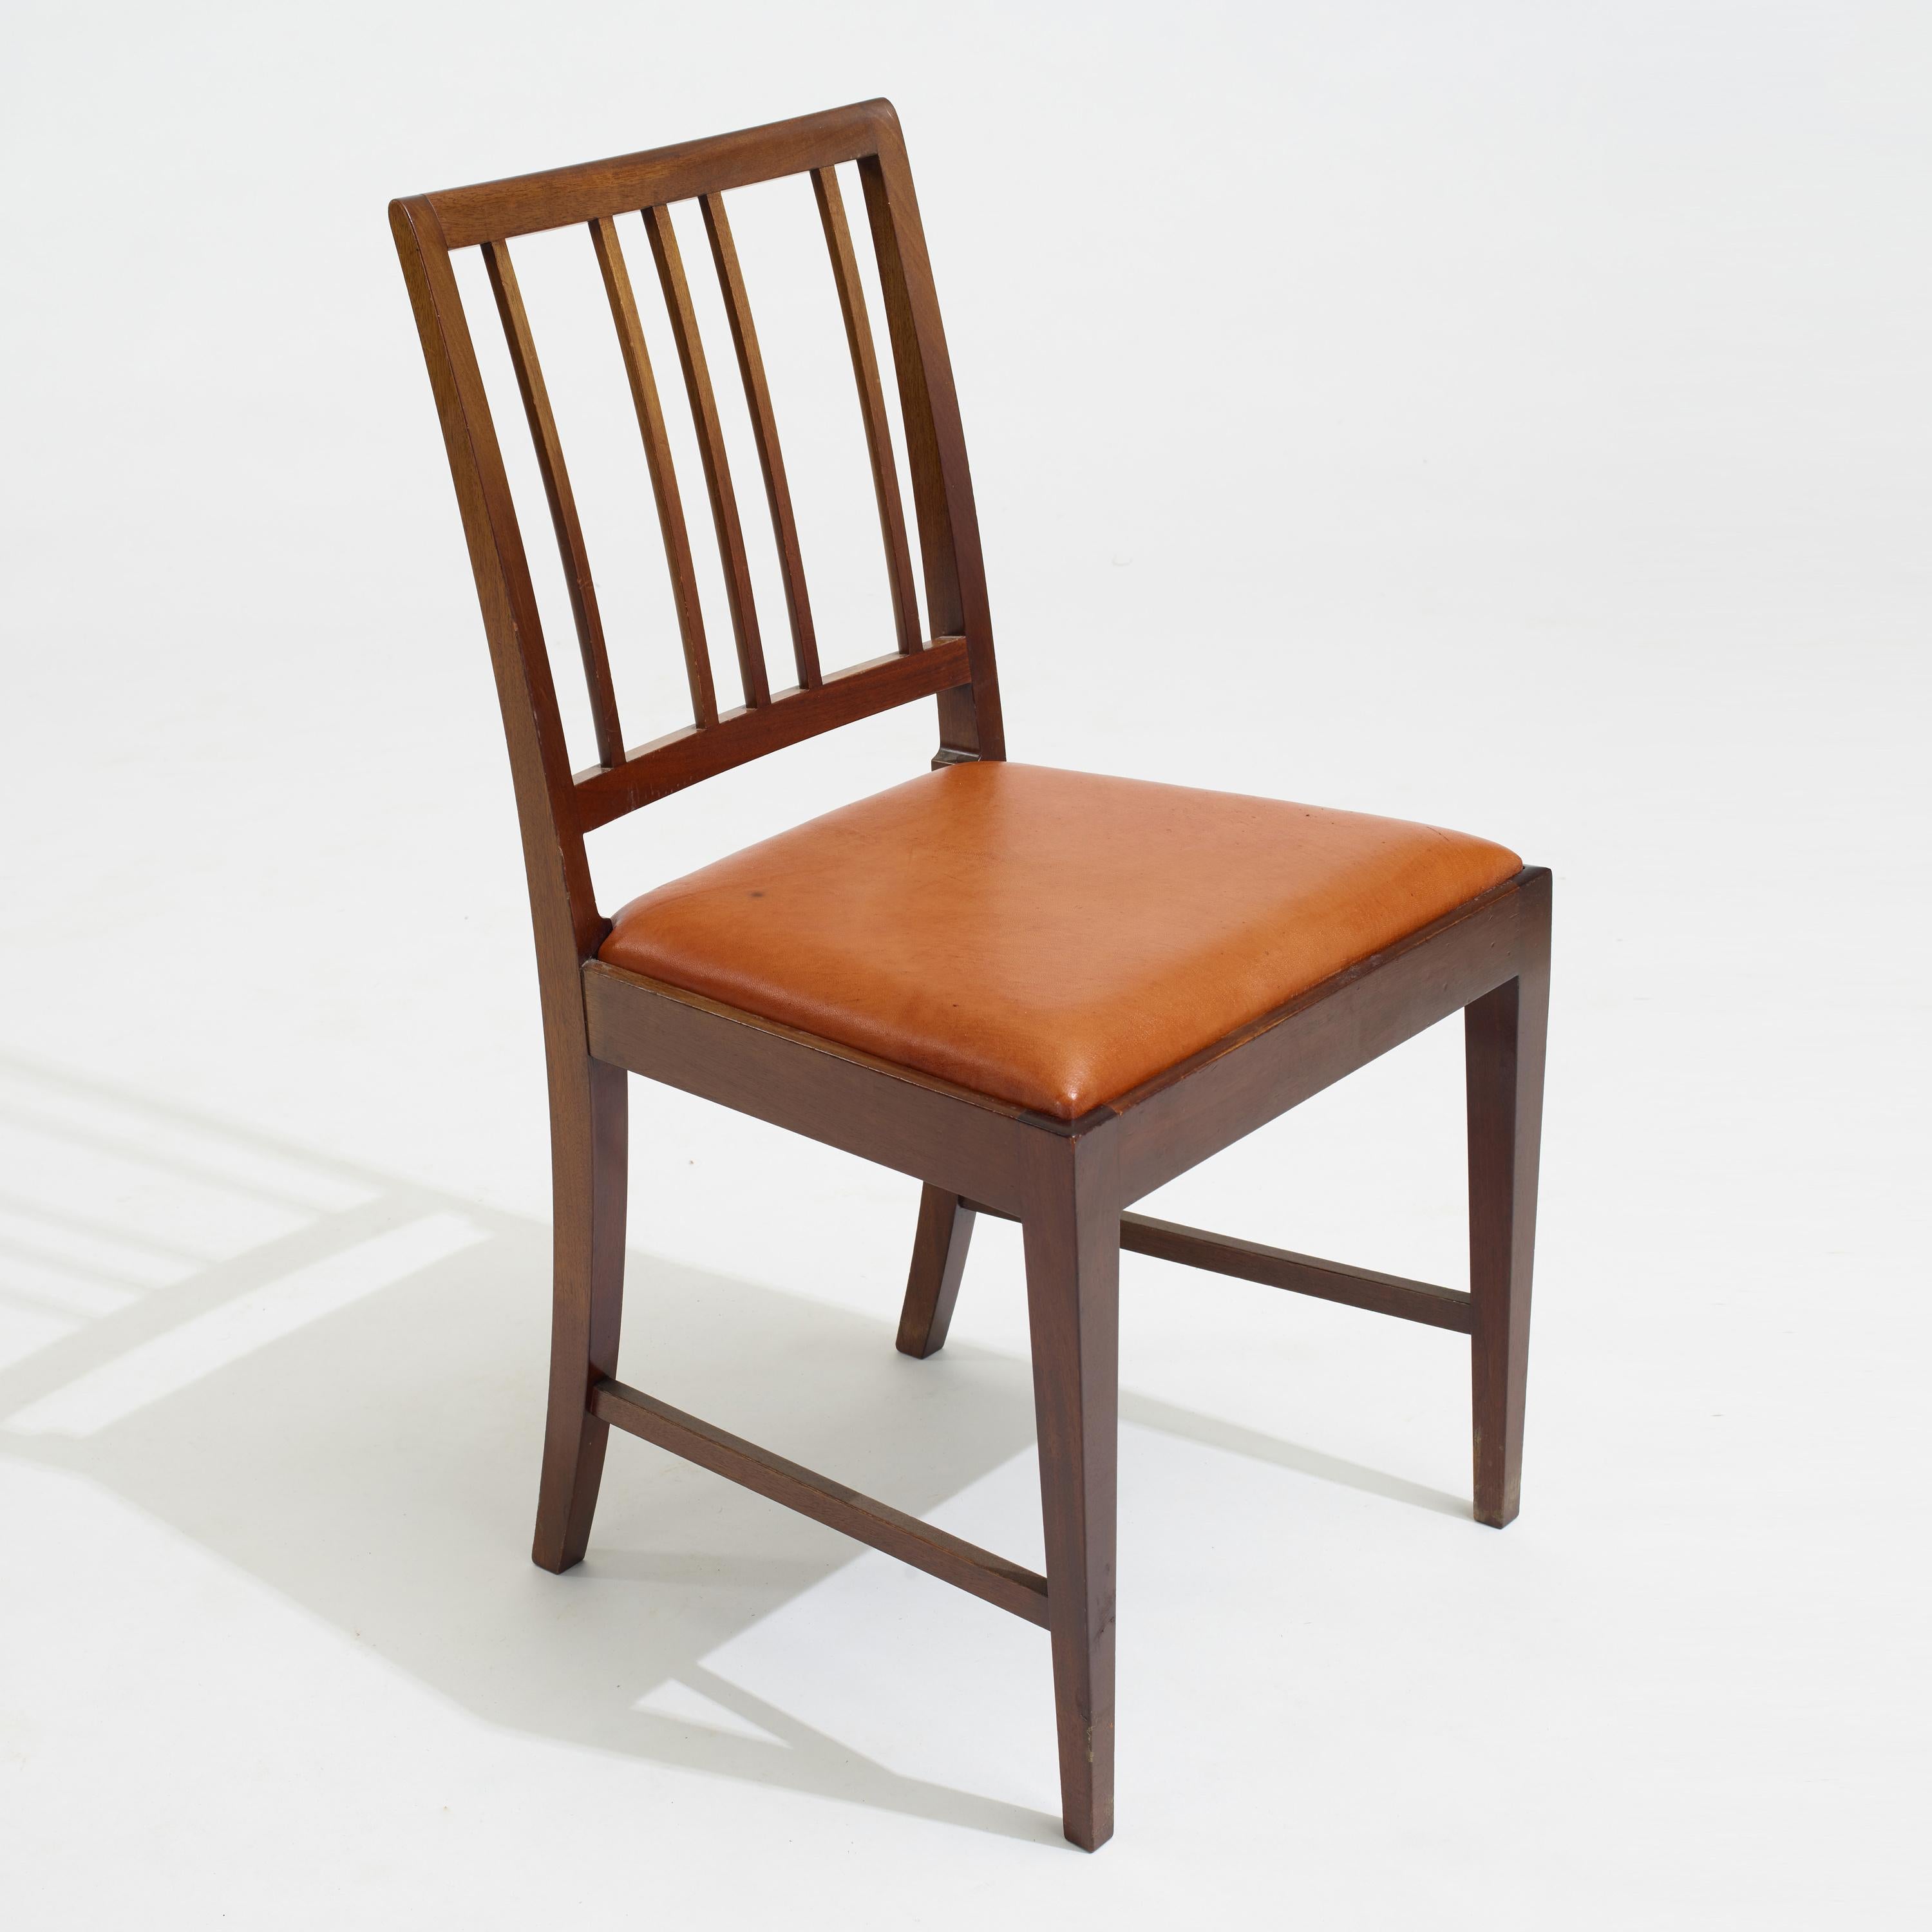 Danish Modern mahogany dining chairs by Frits Henningsen, Denmark, circa 1930s. They have probably been refinished and reupholstered at some point. Beautiful caramel color leather seats. We also have the matching dining table from the same estate